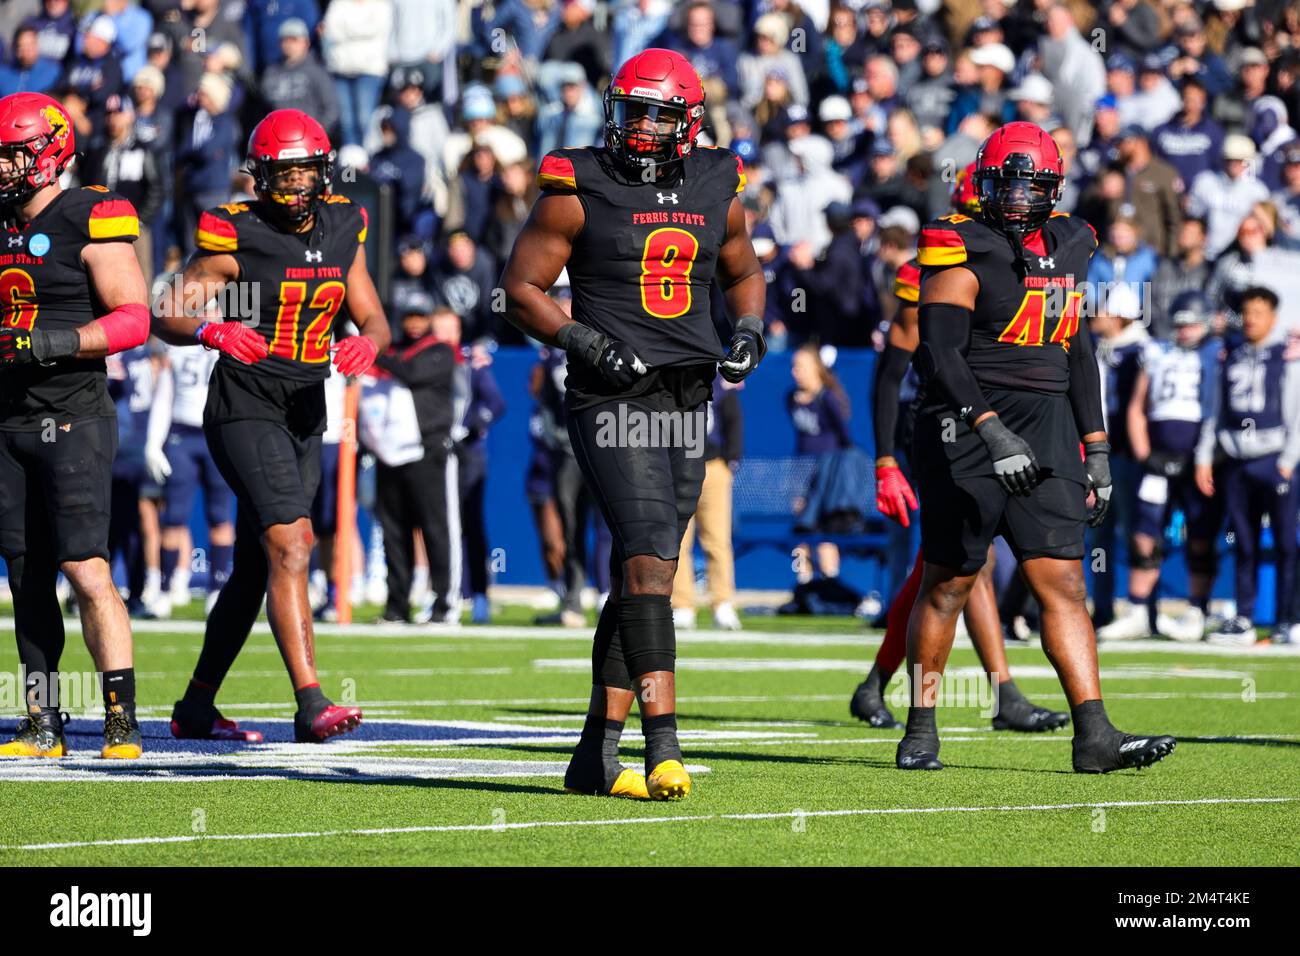 Ferris State Bulldogs defensive tackle Olalere Oladipo (8) during the second quarter NCAA Division II national championship college football game, at Stock Photo